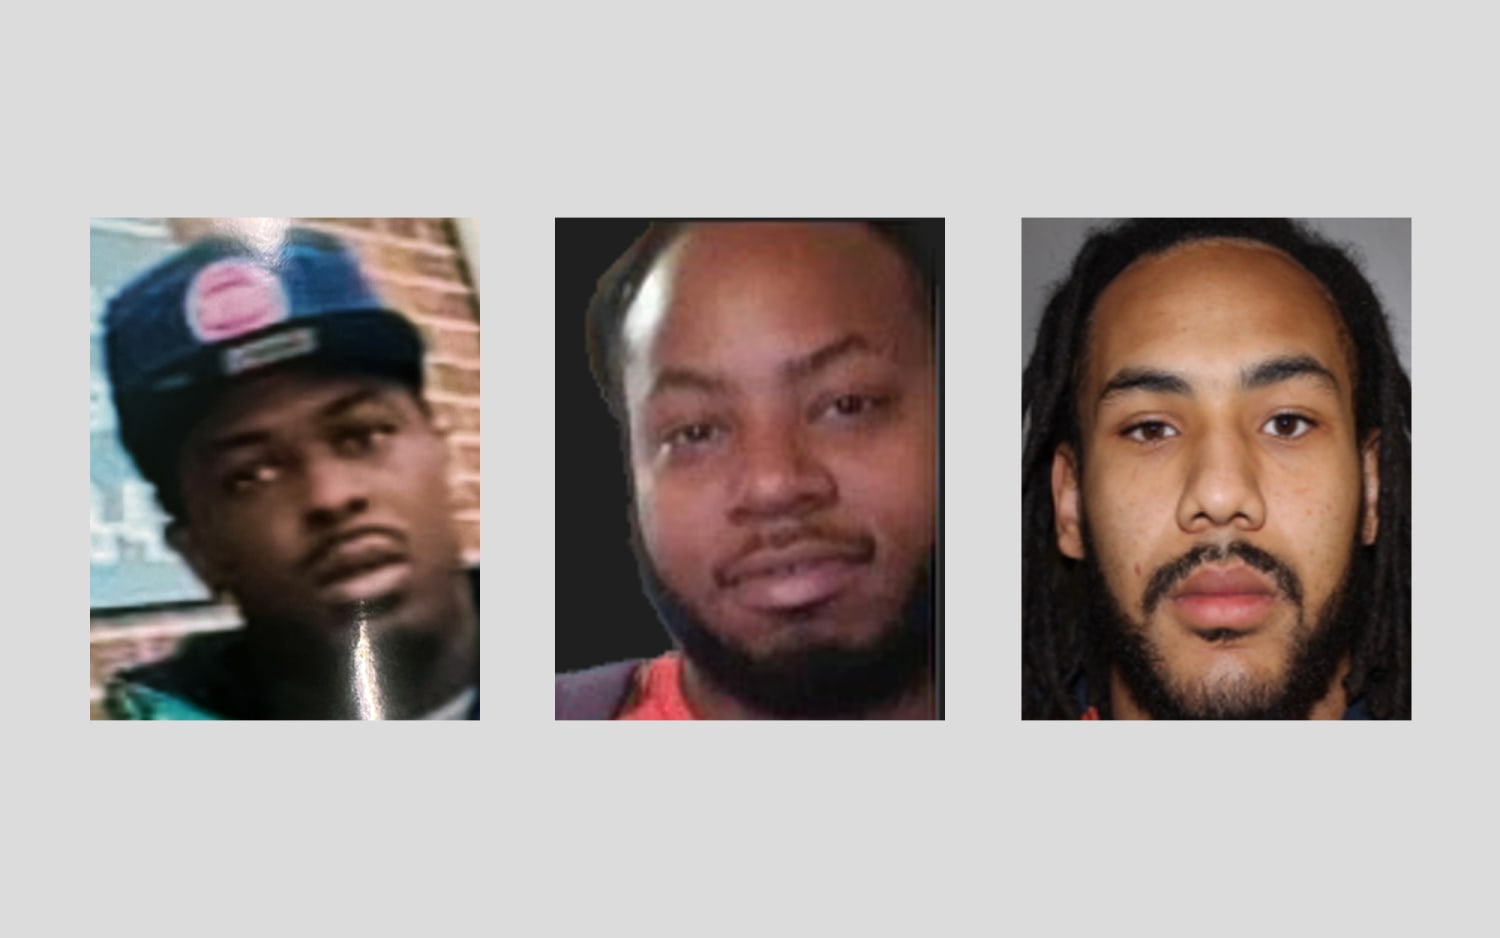 3 Michigan rappers reported missing after canceled Detroit performance 10  days ago